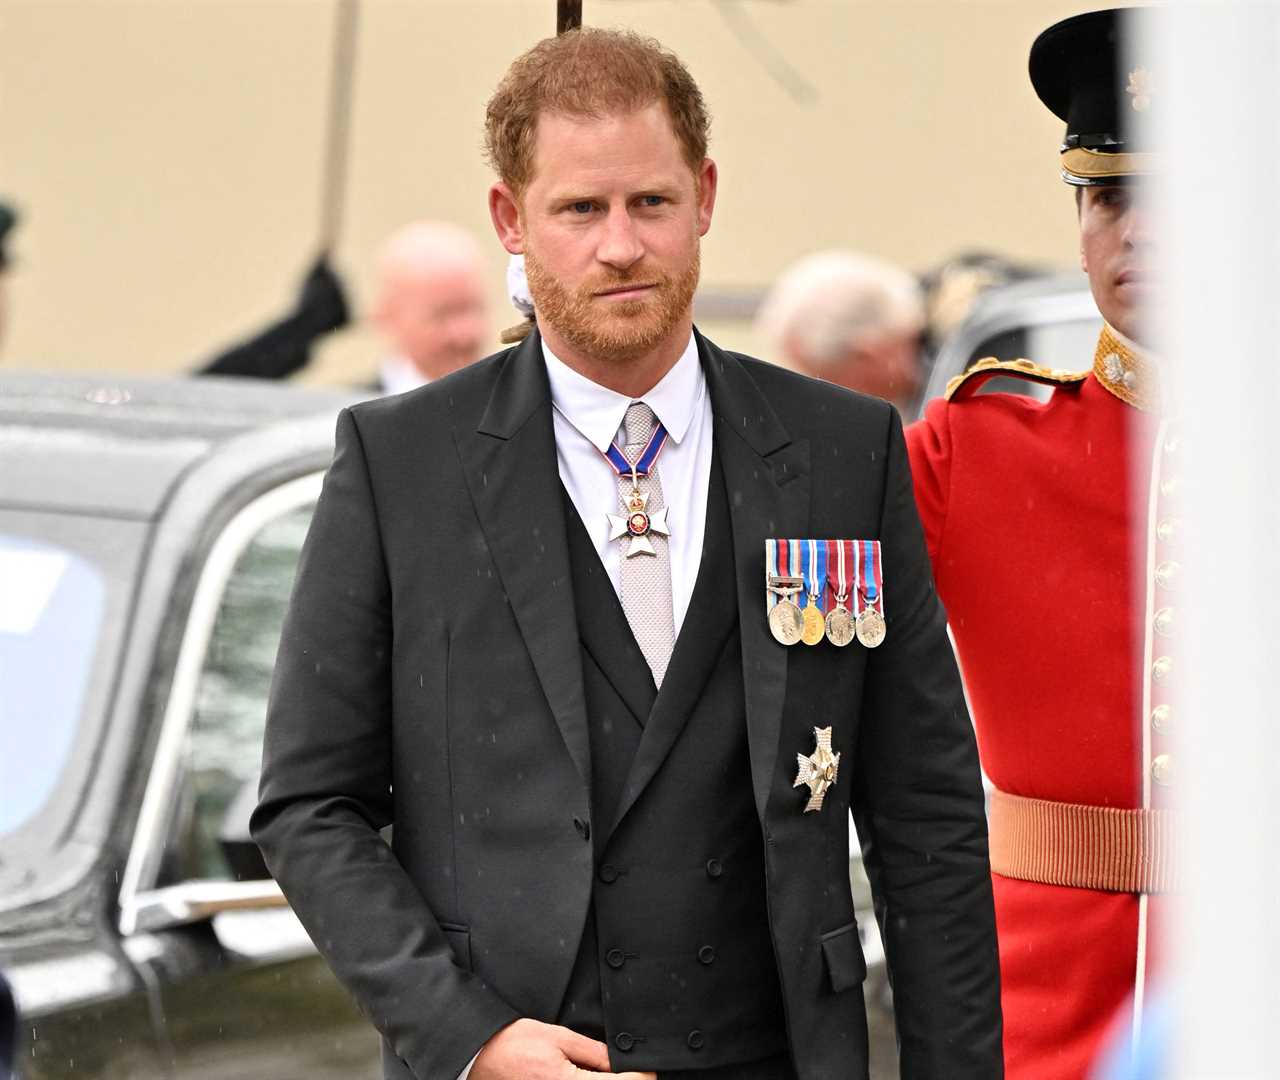 ‘Cocky’ Prince Harry is defiant and ‘without shame’ as he walks into coronation alone, says body language expert